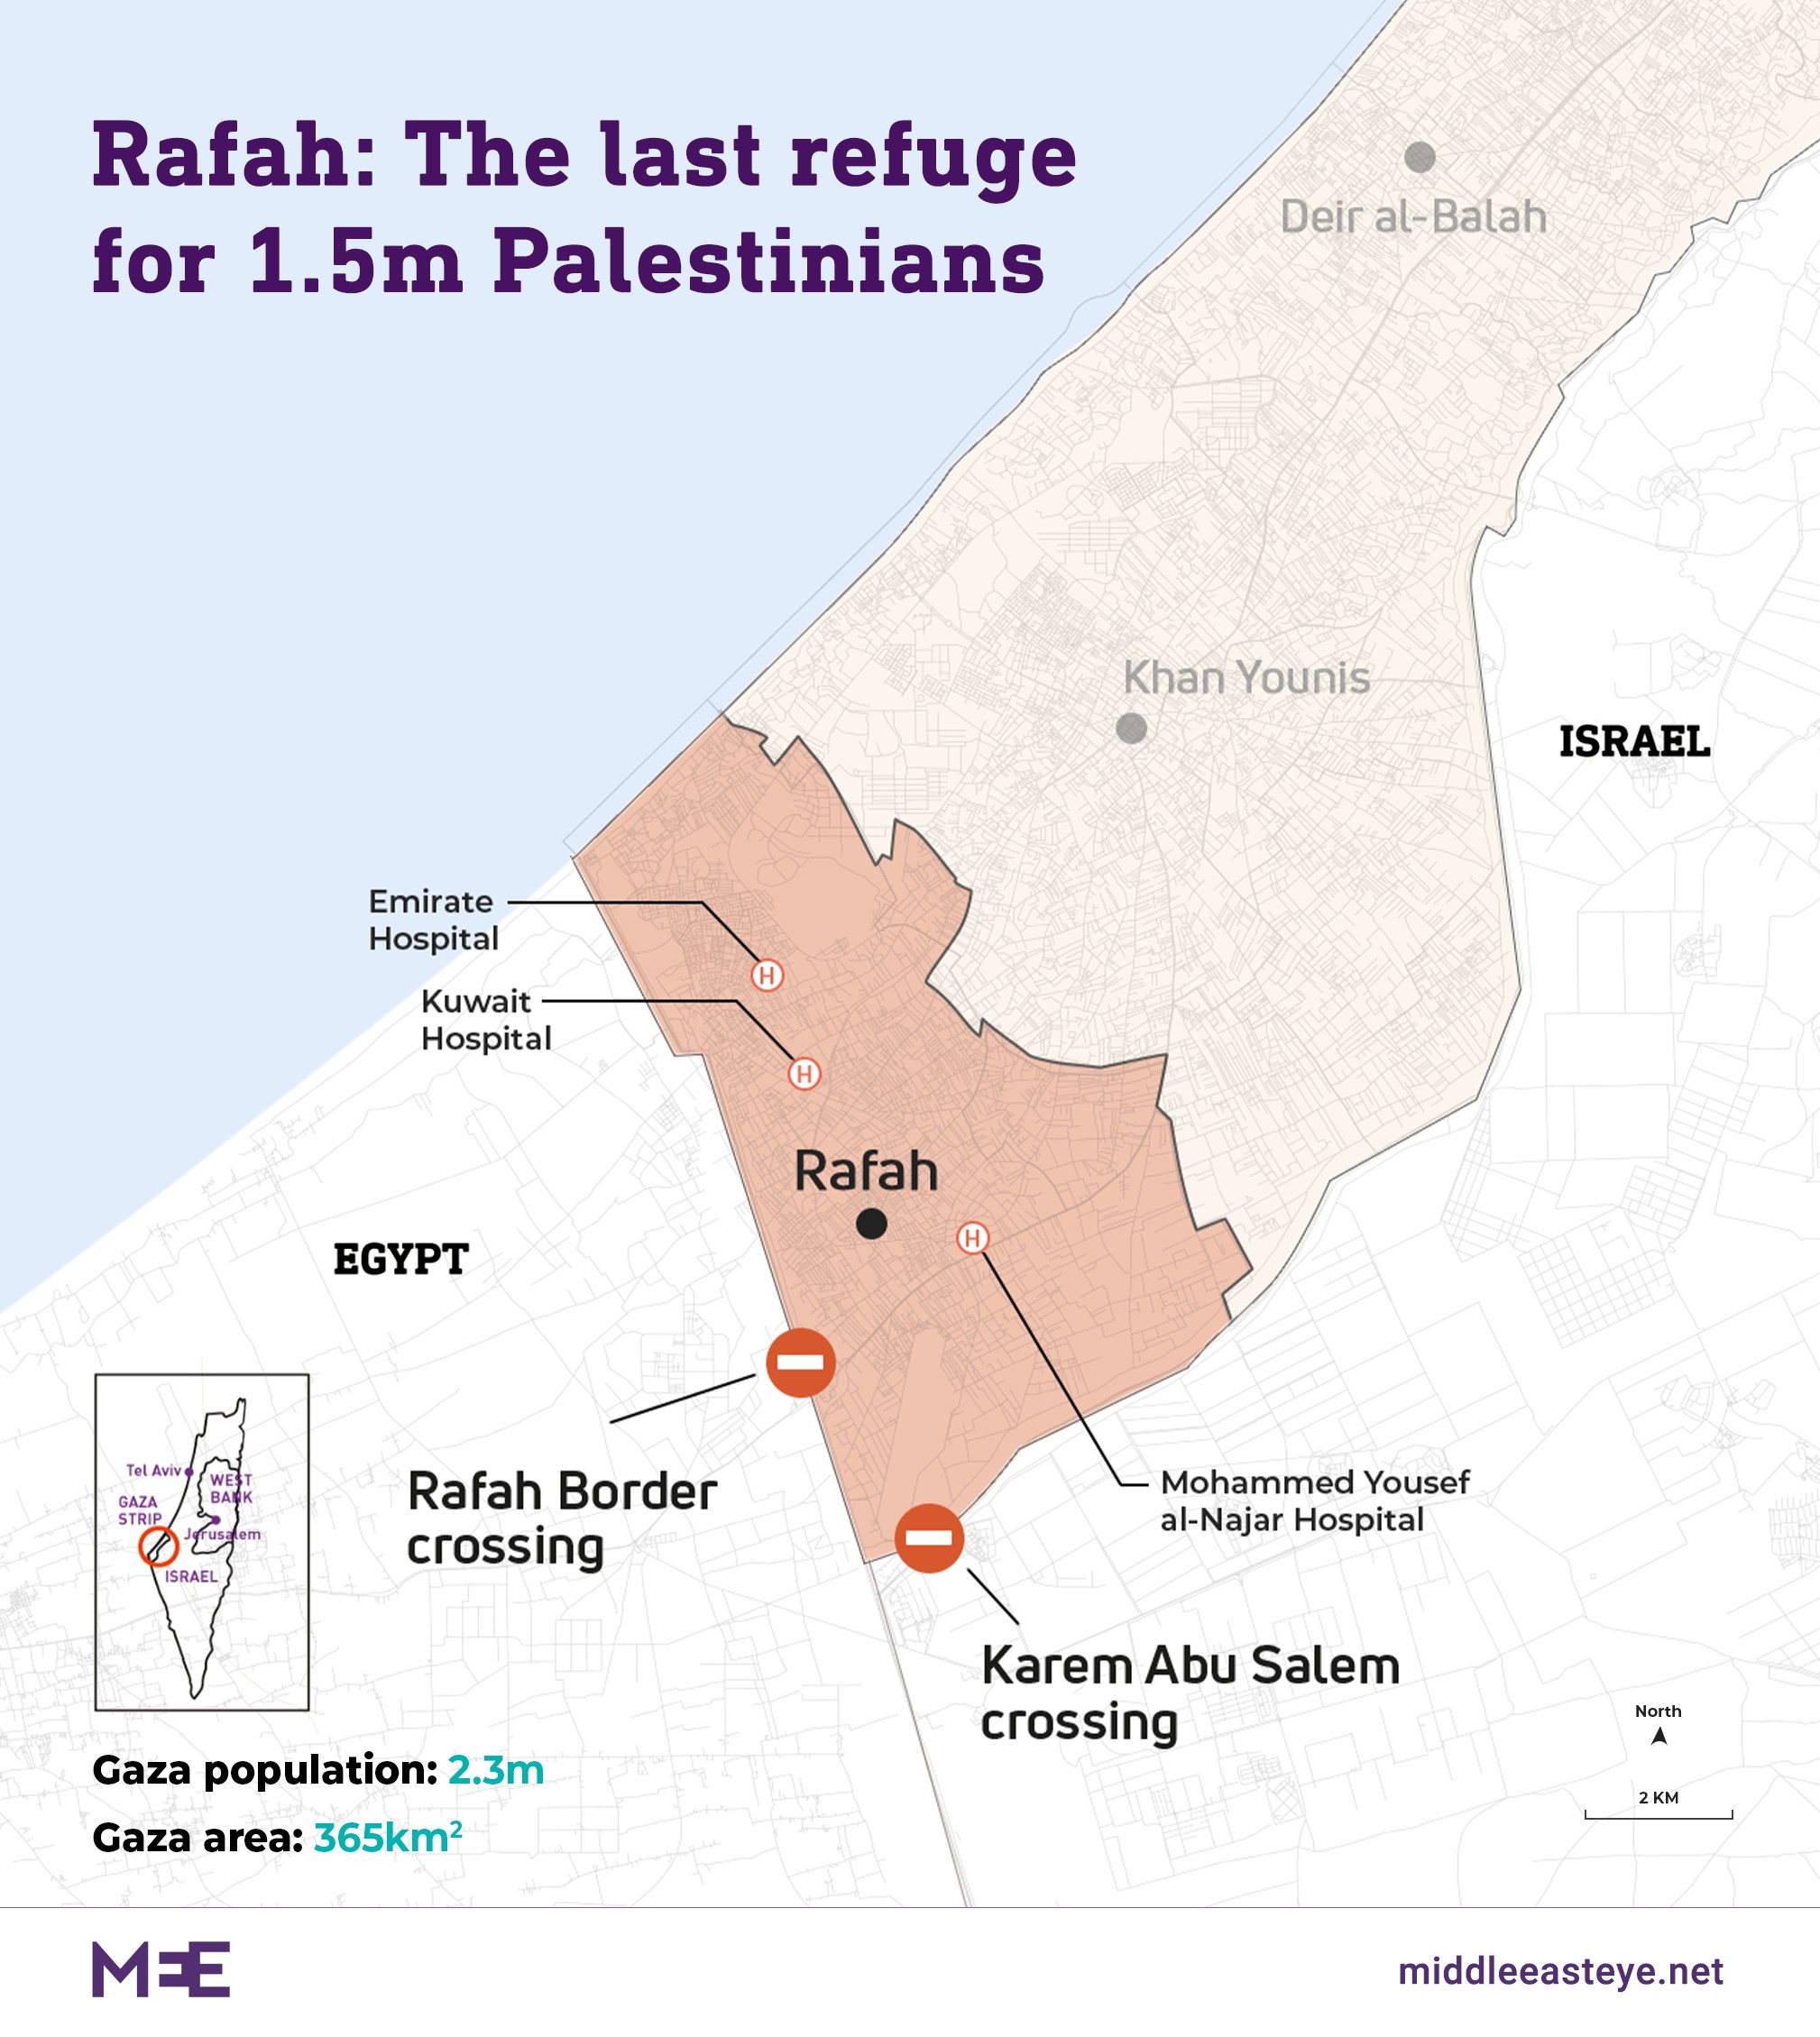 Rafah: The last refuge for 1.5m Palestinians